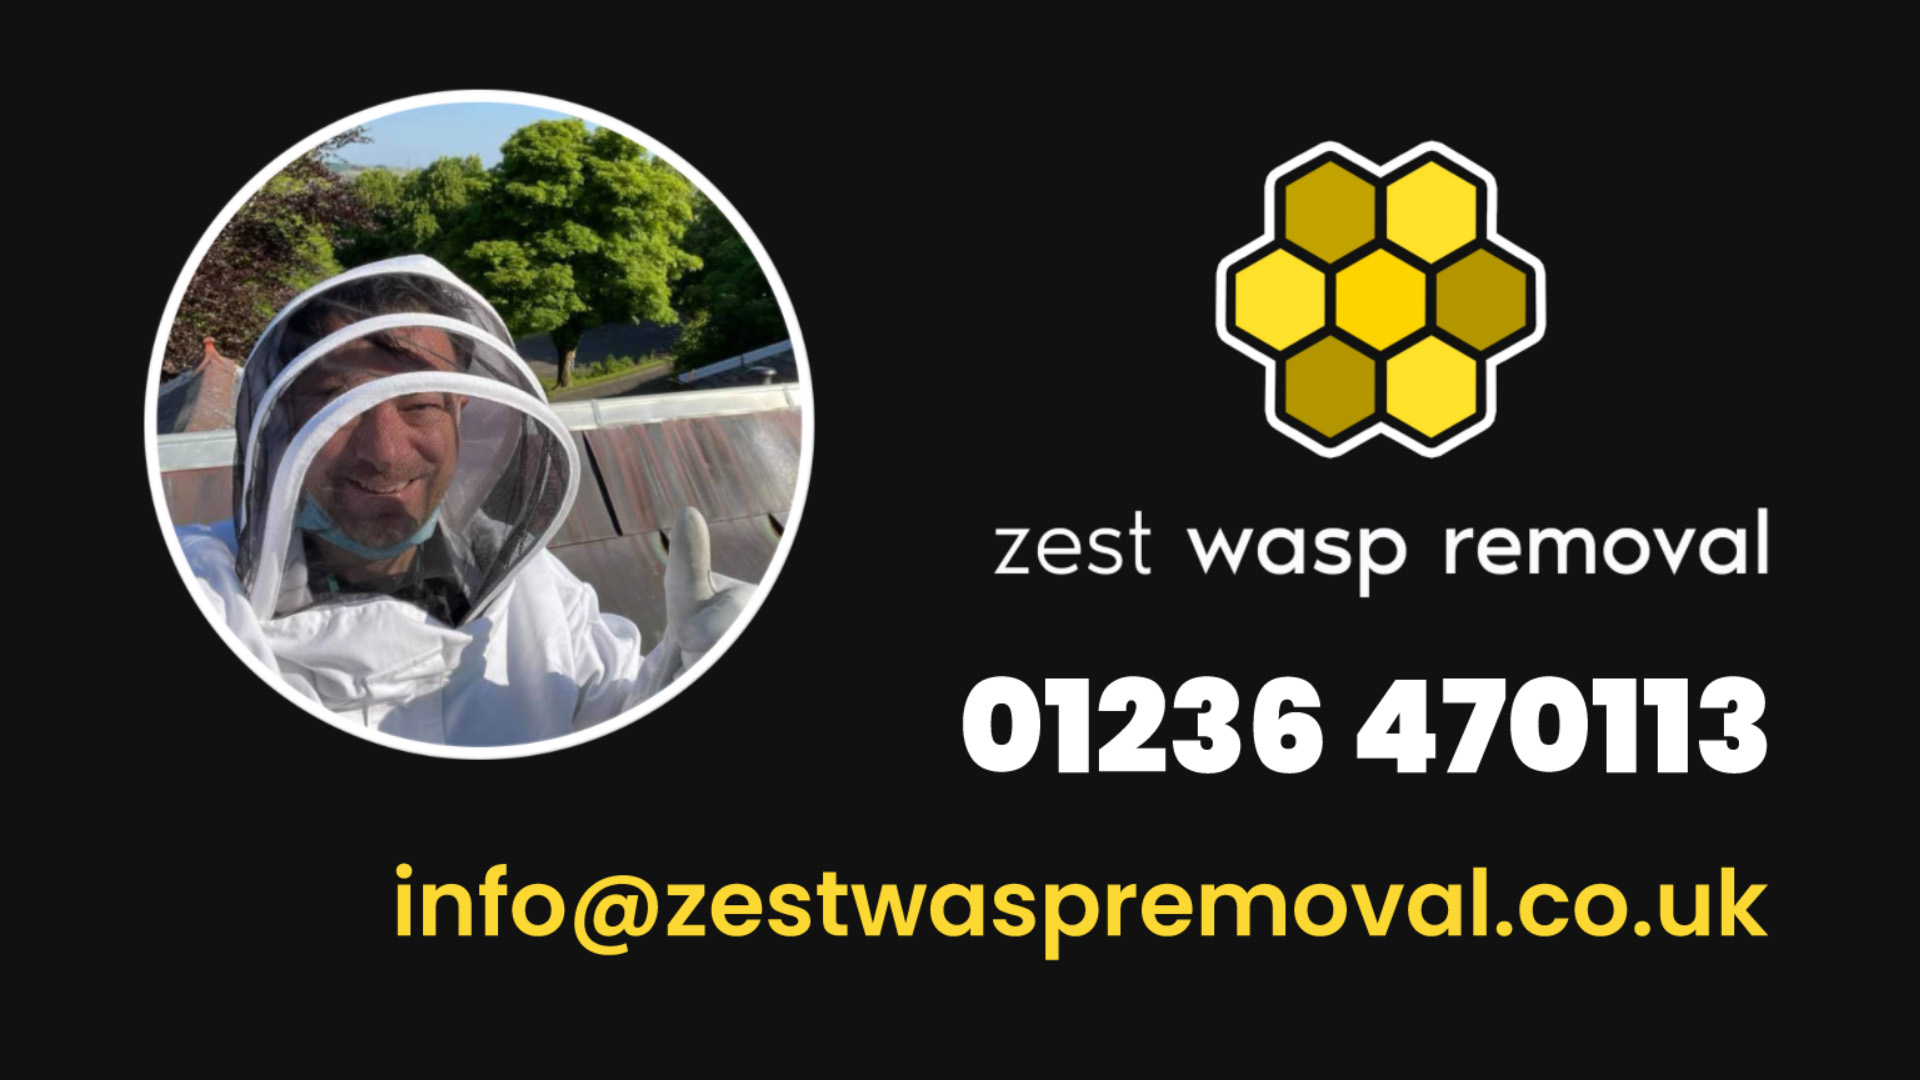 zest wasp removal scotland logo contact details